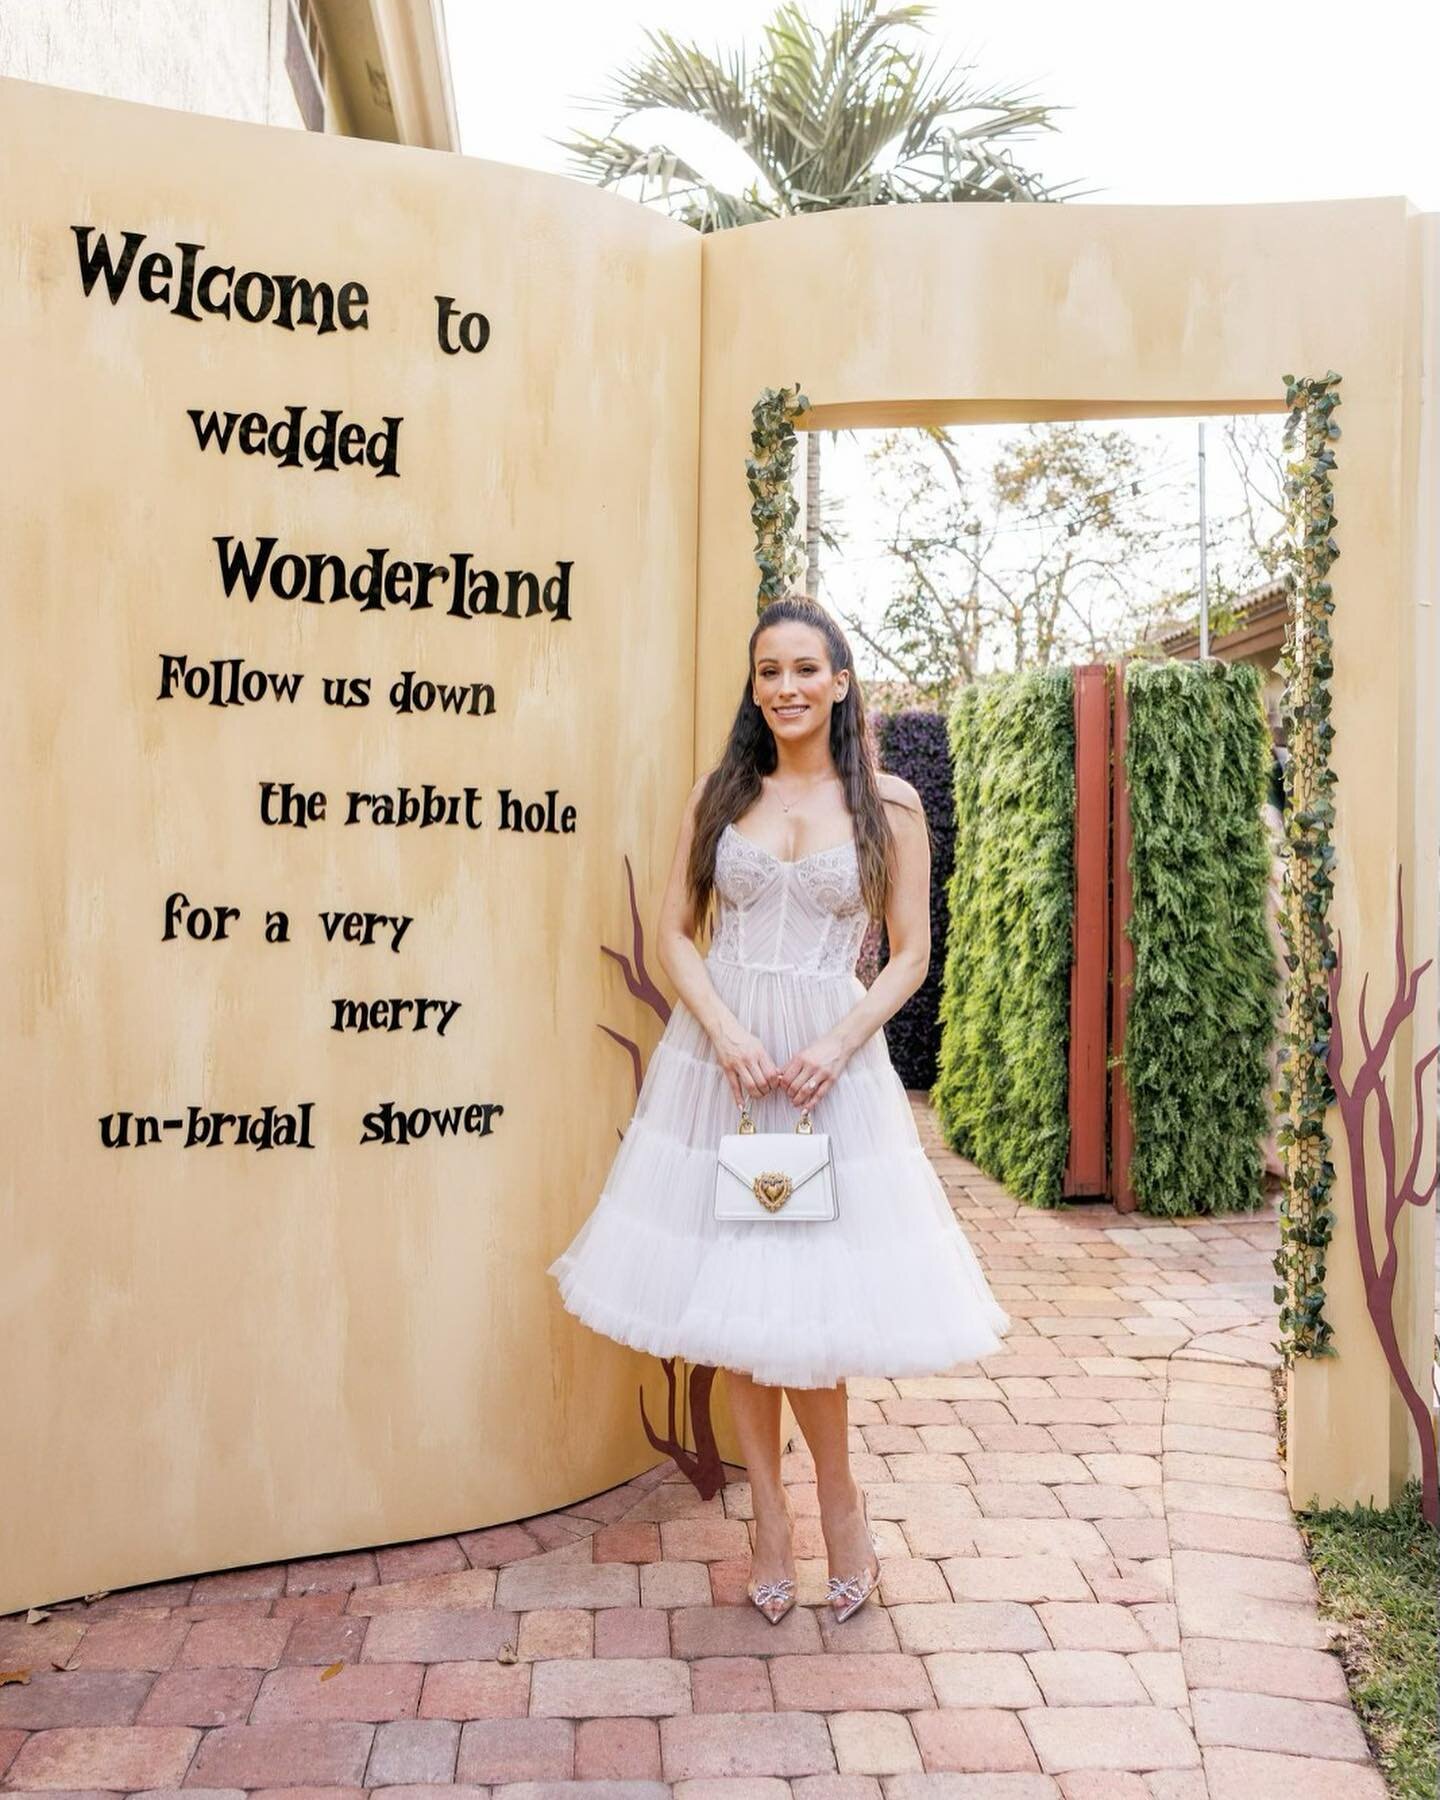 Swipe left for all custom pieces we created for an Alice and wonderland bridal shower 🫶🏼
.
Bride: @drfredericka 
Camera: @clickinmar 
.
.
.
.
#aliceandwonderland #aliceandwonderlandtheme #miamibridalshower #miamibridal #bridalshower #bridalshowergo